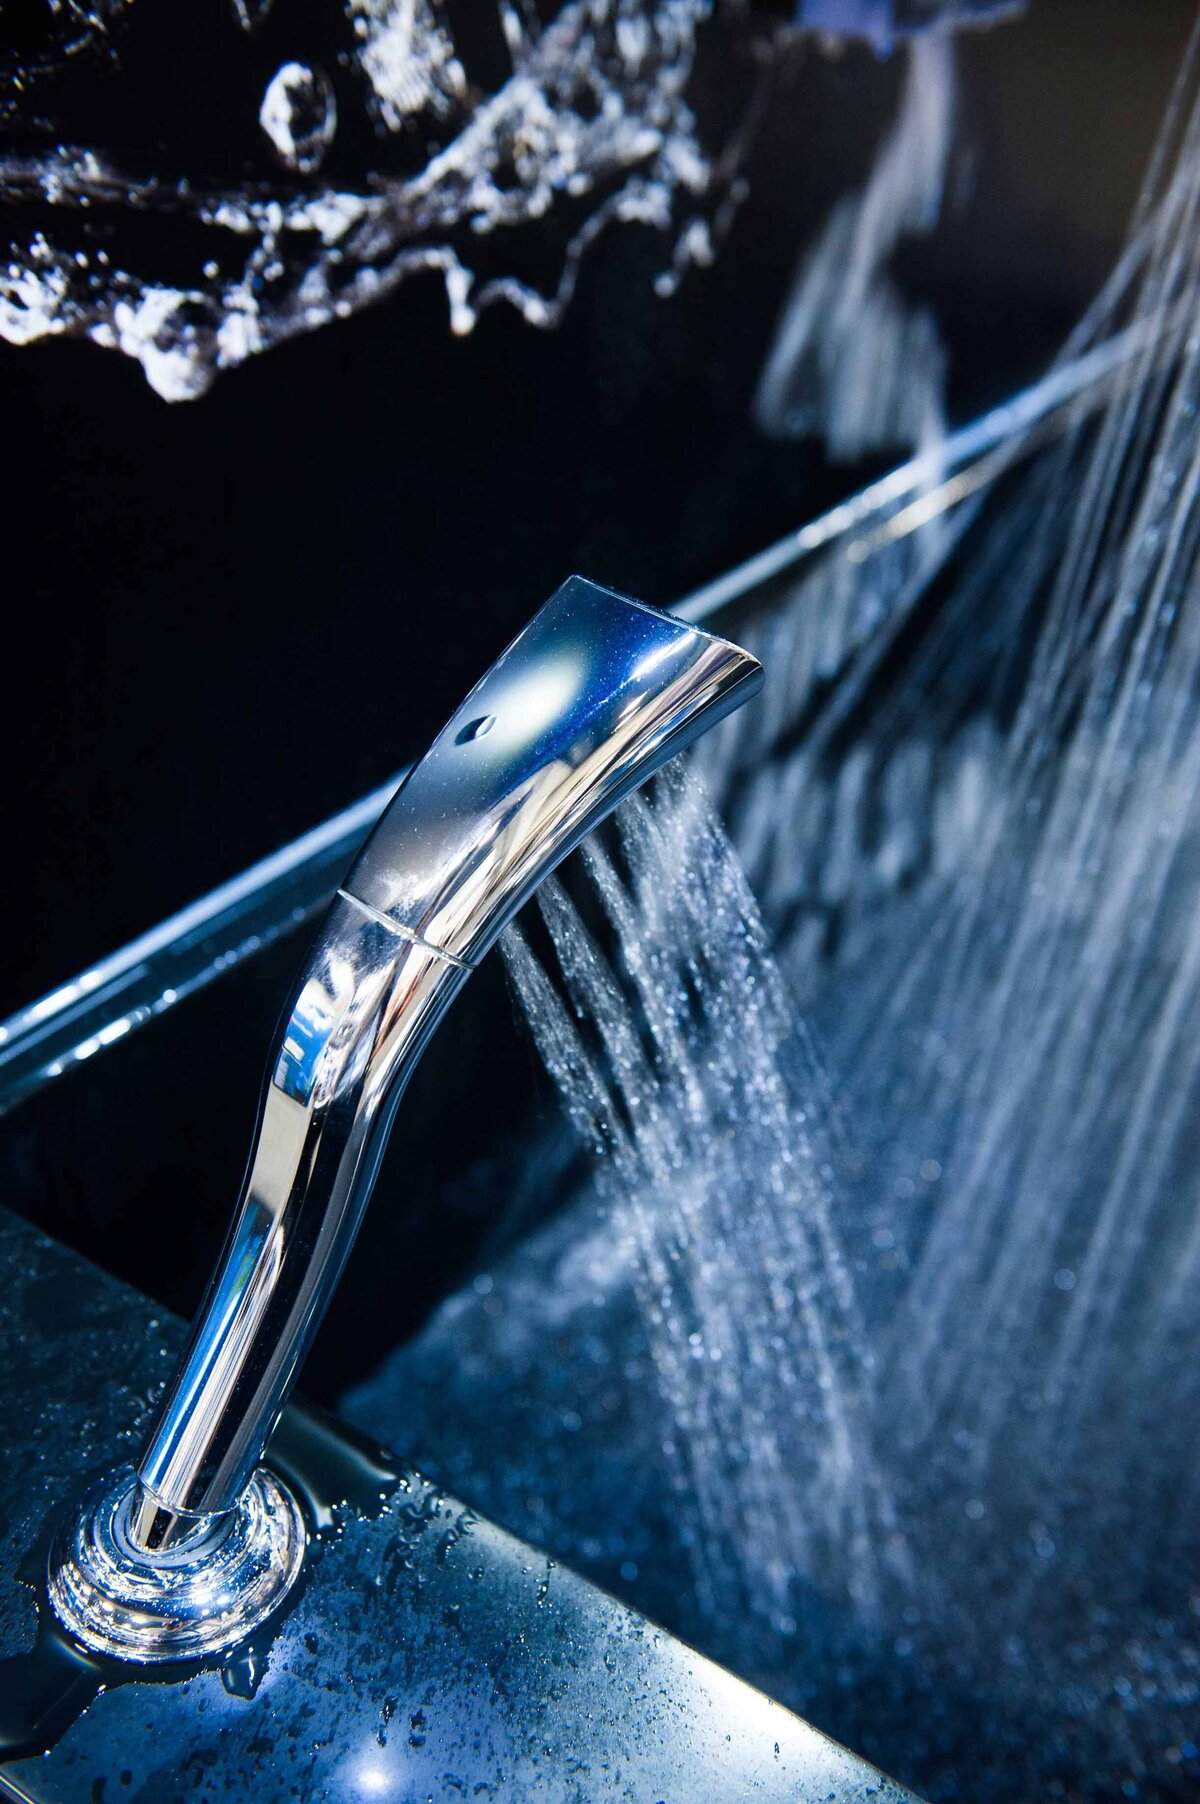 A sleek and modern silver faucet sprays water at a display booth